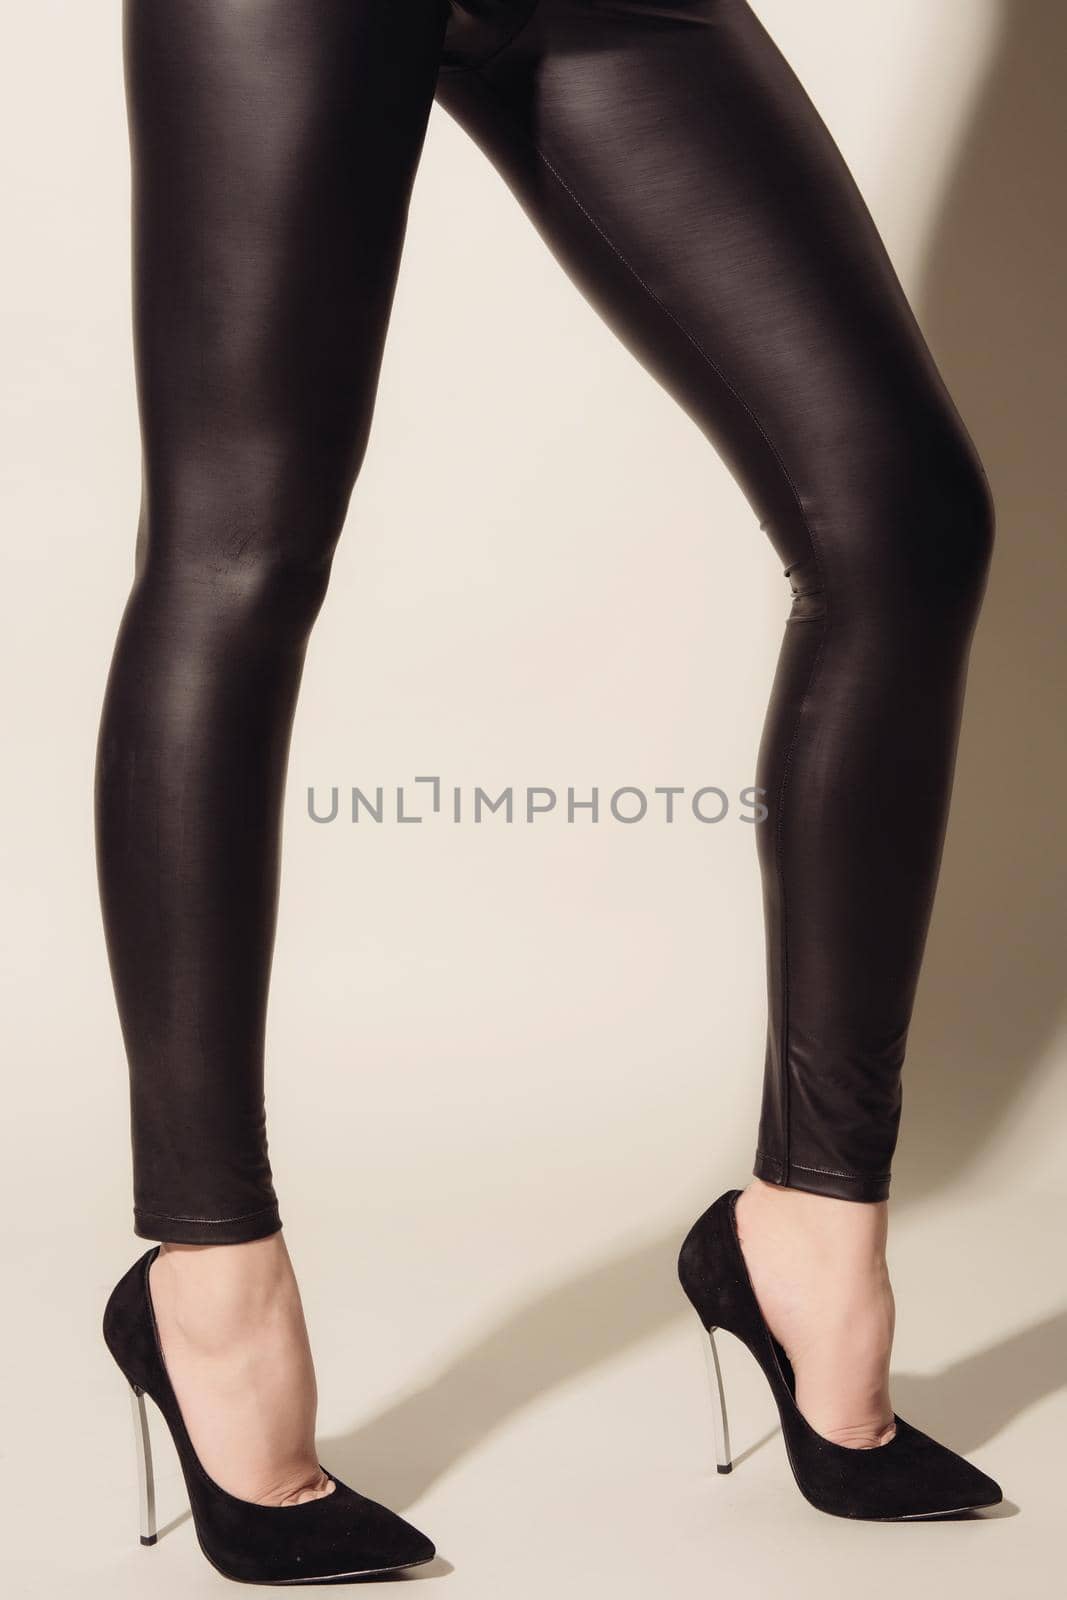 Women's legs in black tight-fitting leather trousers and high-heeled shoes standing by zartarn